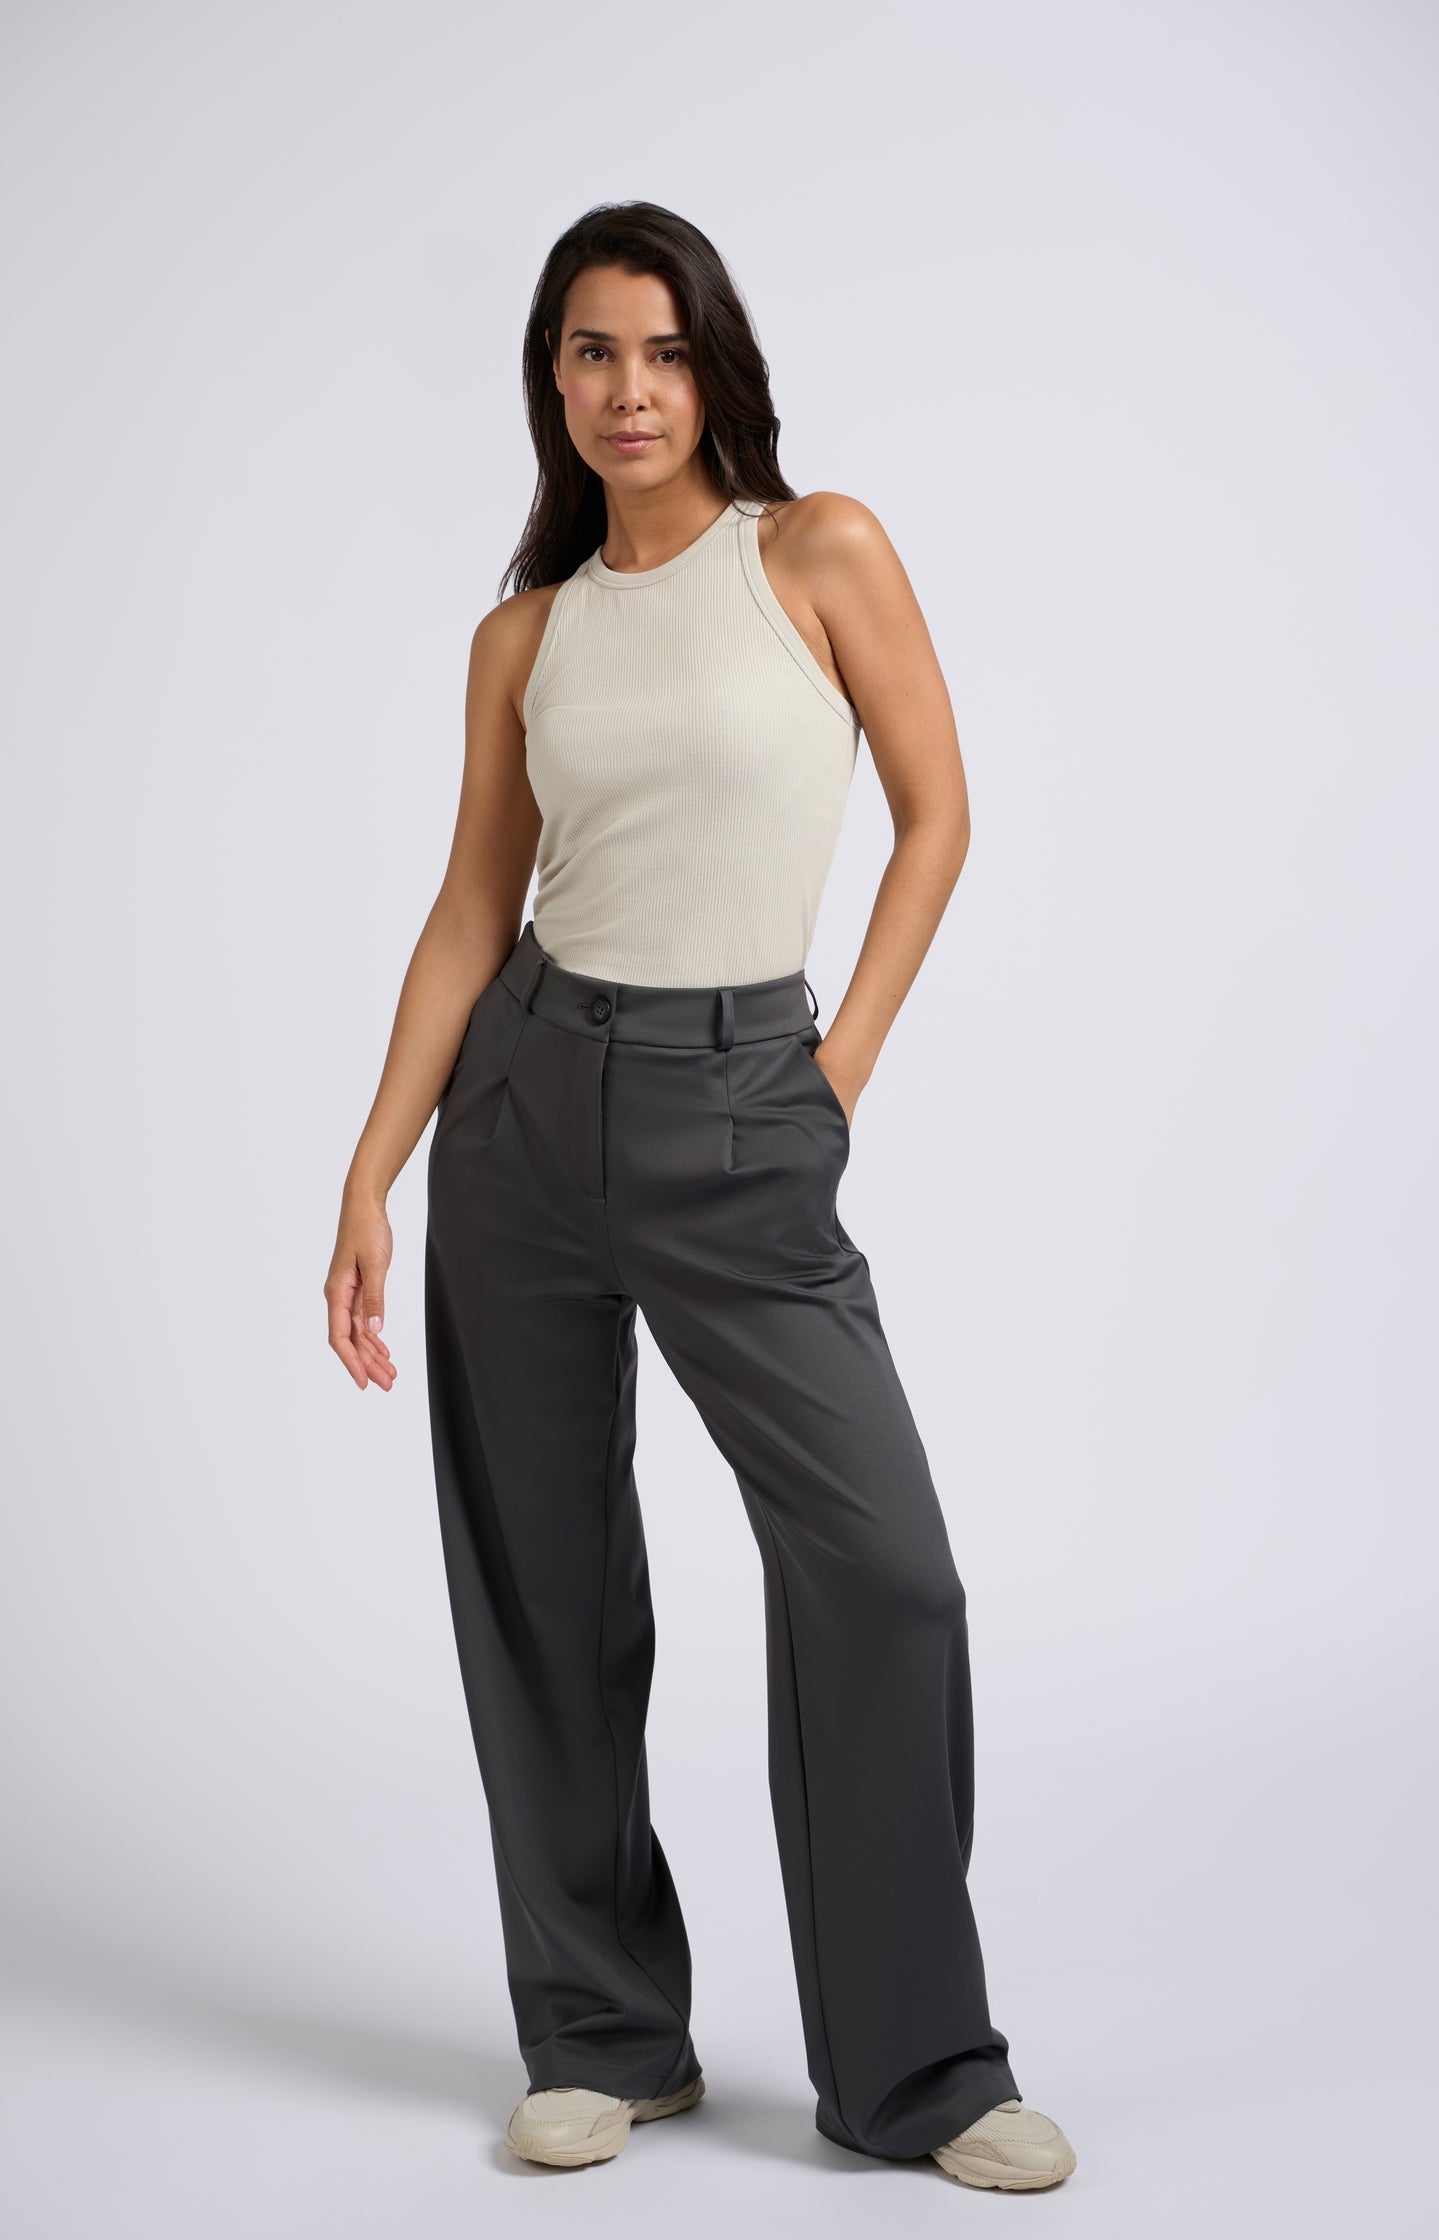 Jersey trousers with wide legs and pleated details